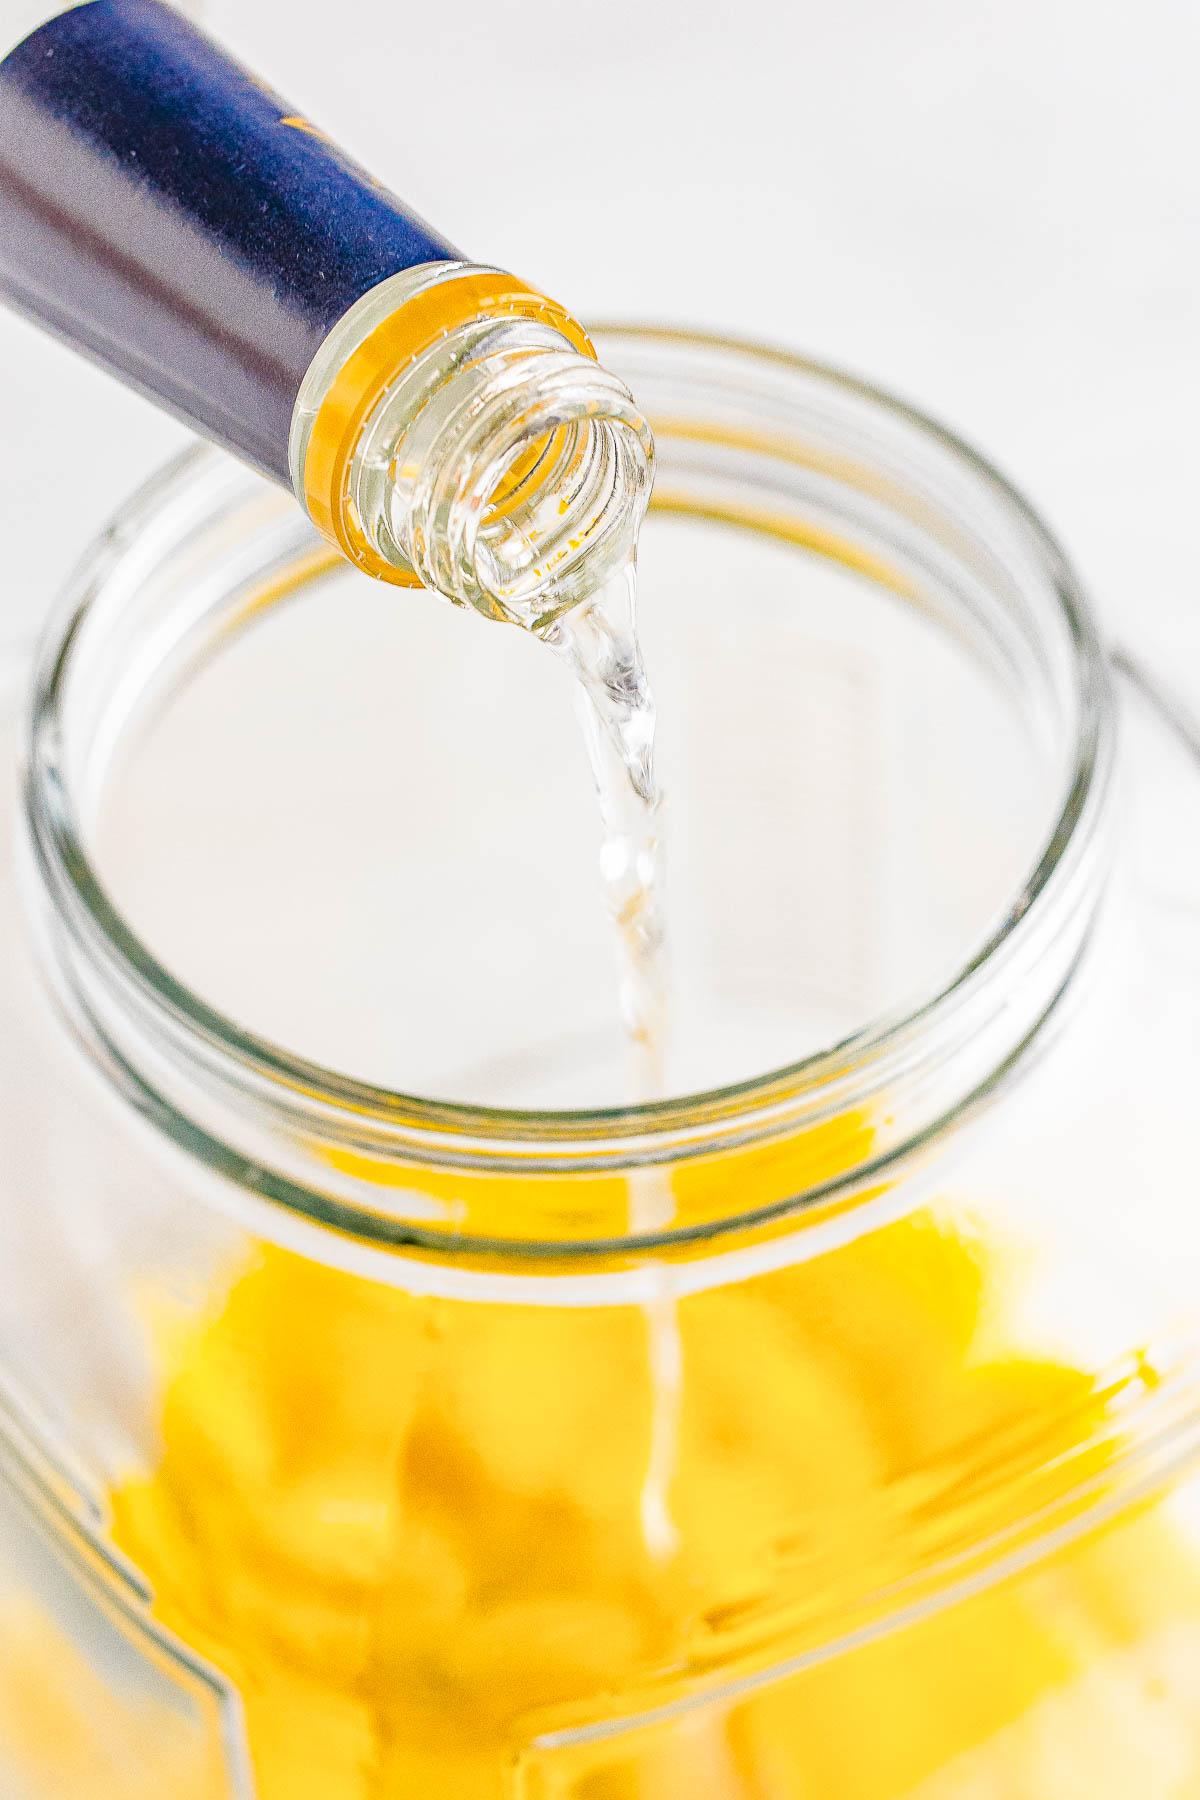 Pouring a clear liquid from a bottle into a glass jar filled with lemon peels.